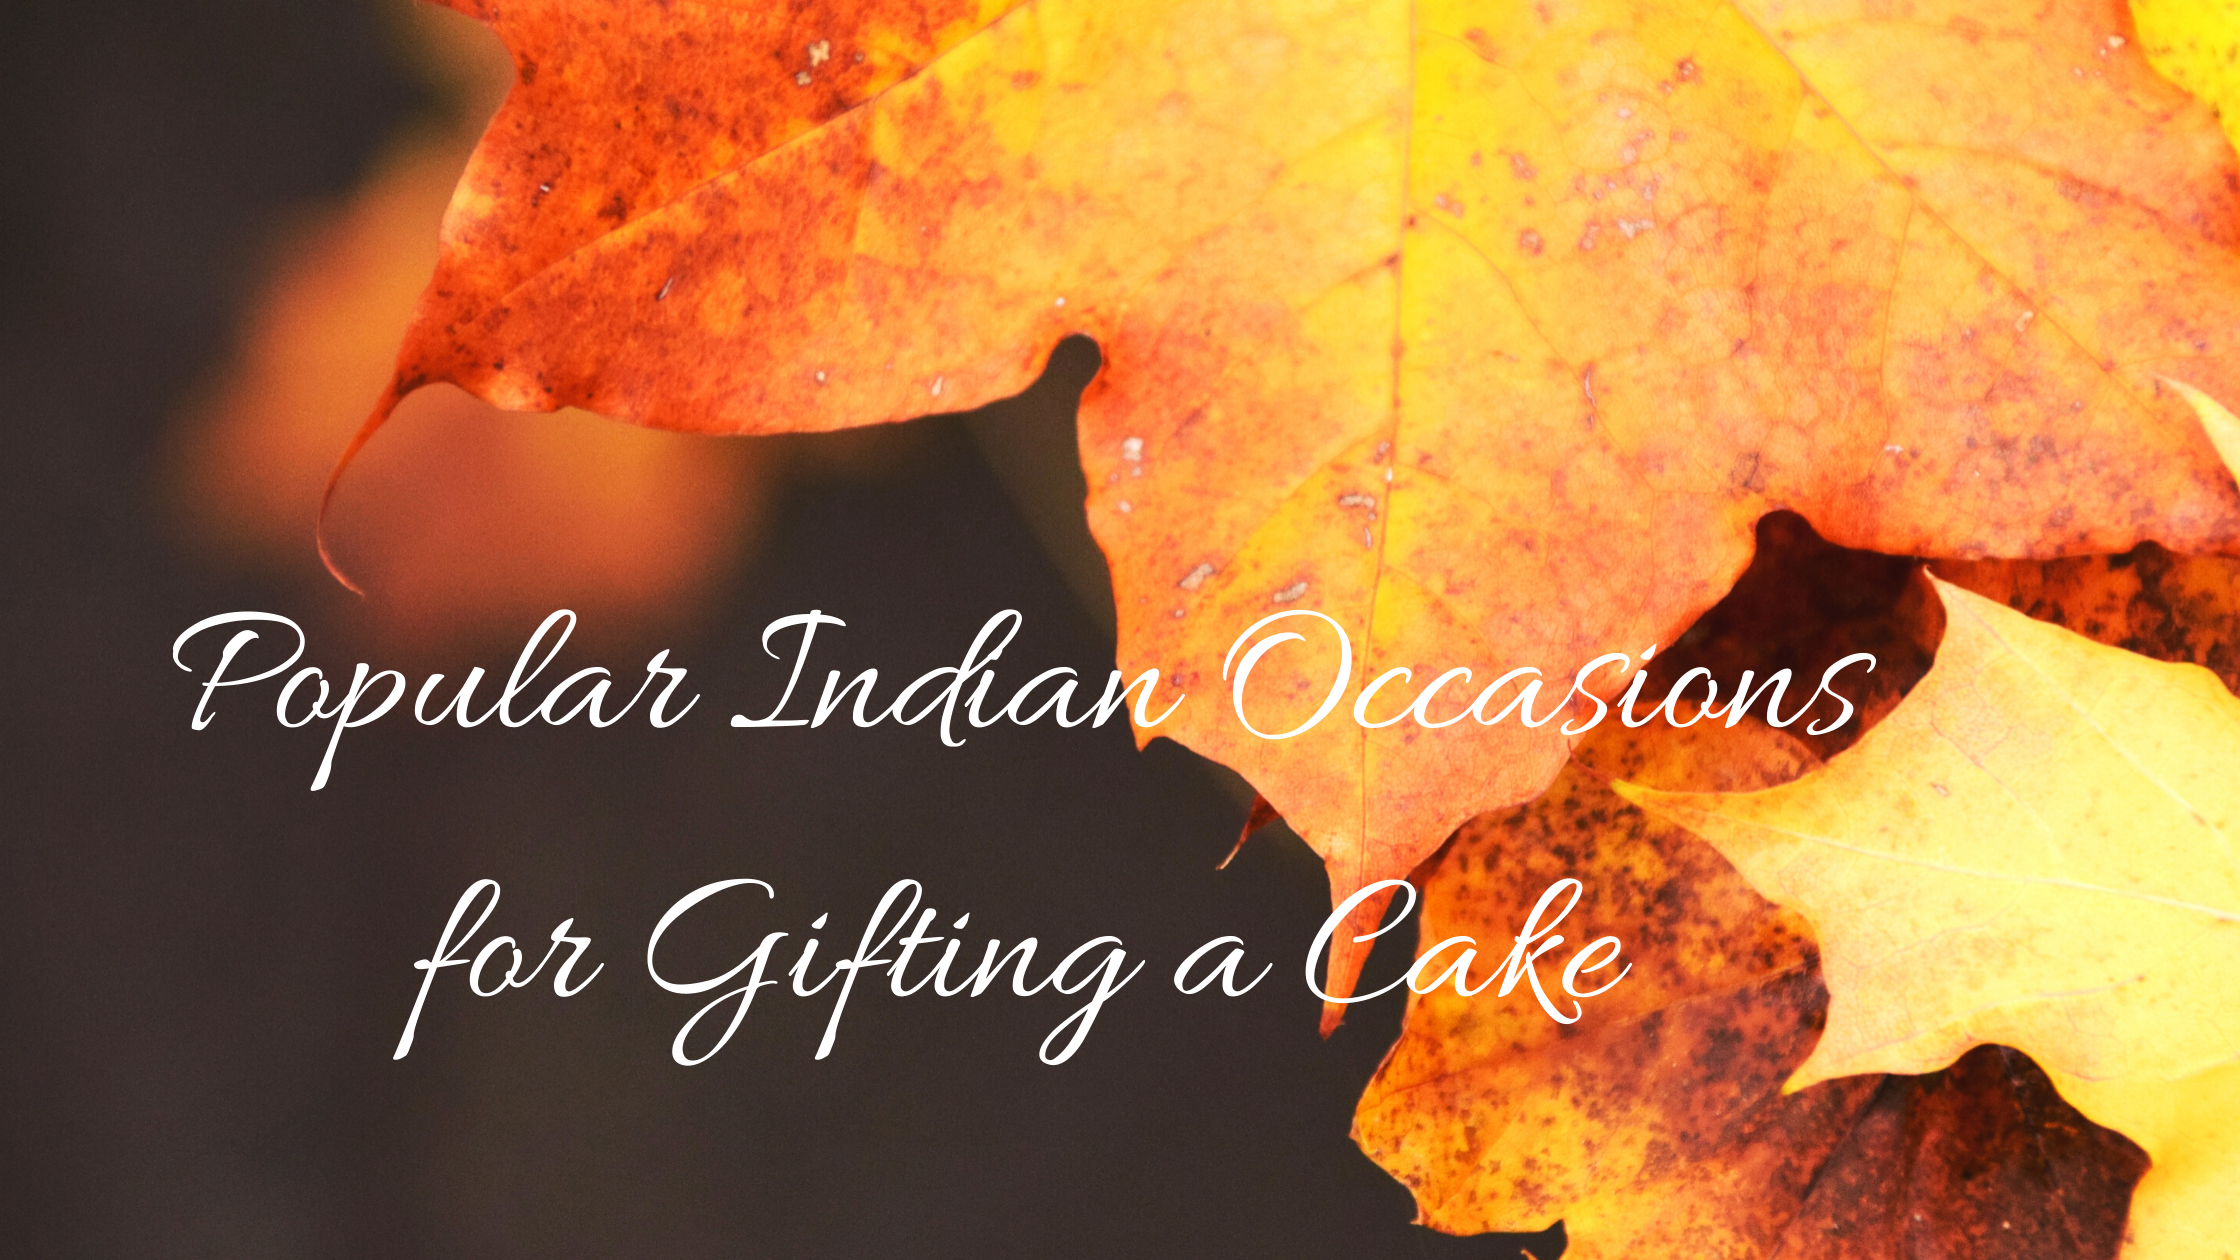 Popular Indian Occasions for Gifting a Cake